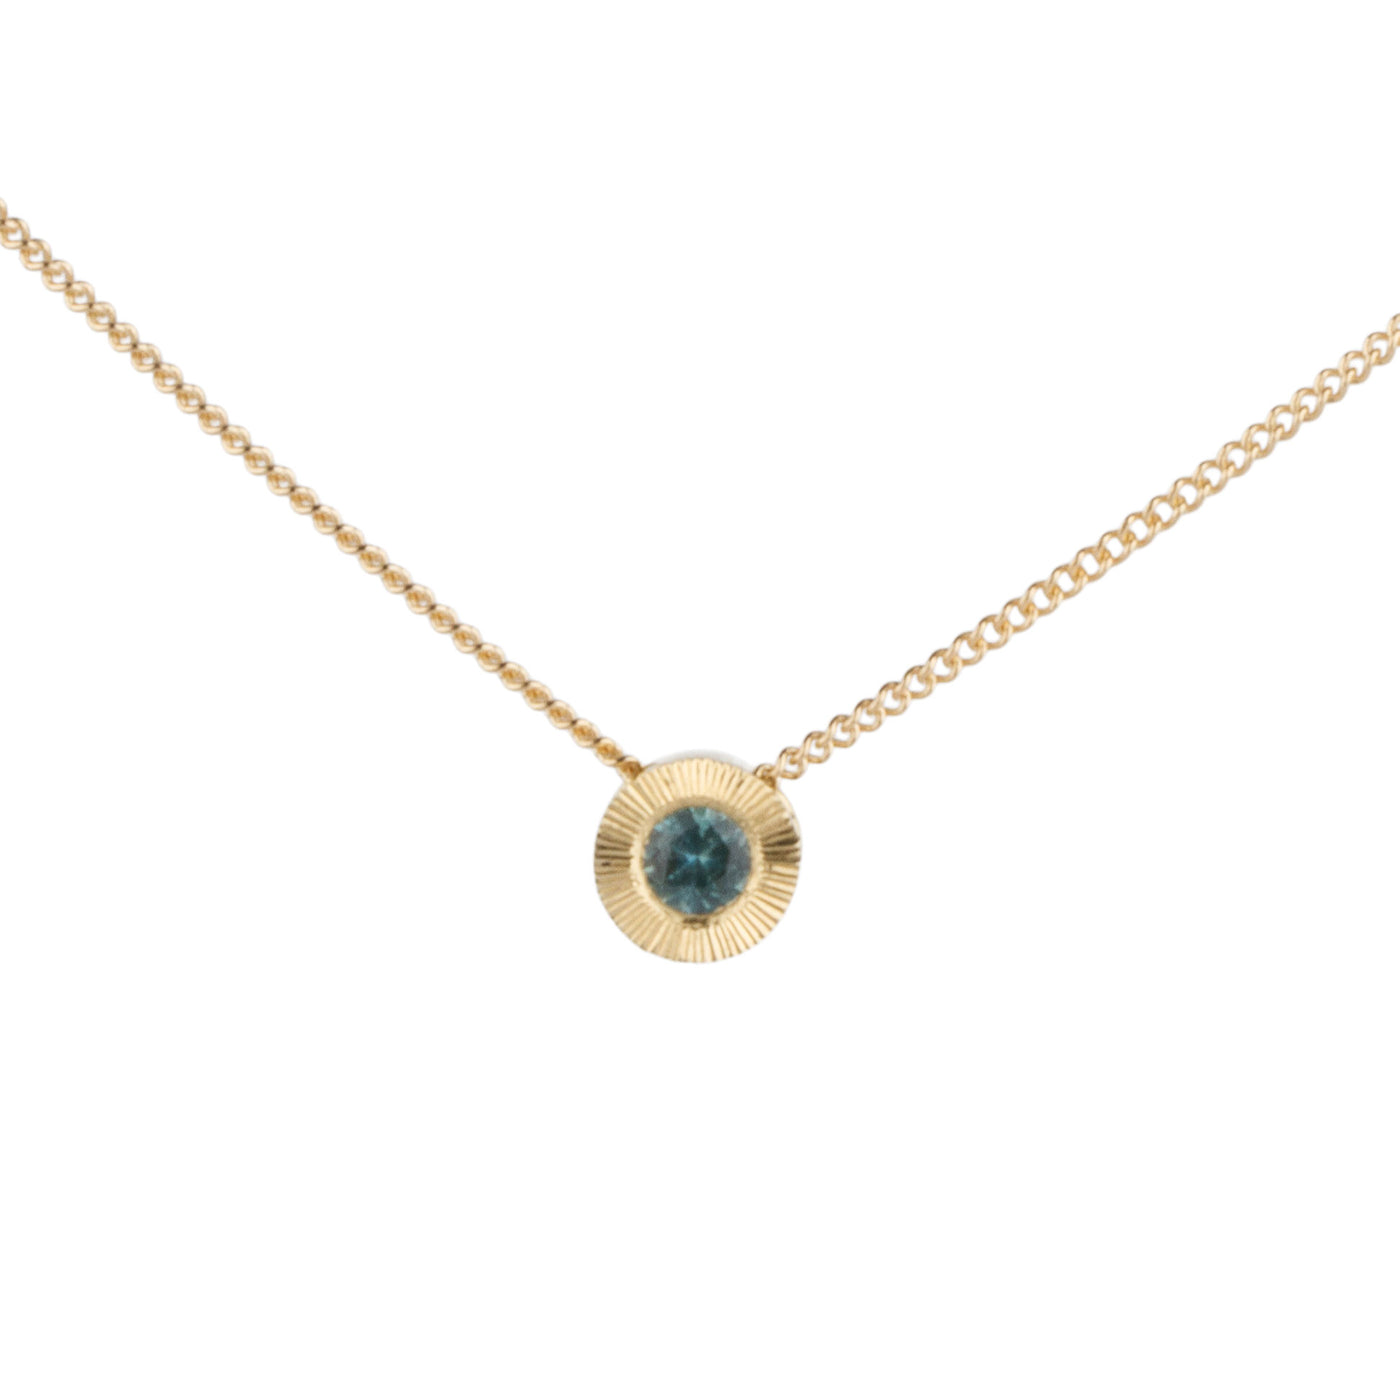 14k yellow gold small aurora necklace with a teal Montana sapphire center on a white background